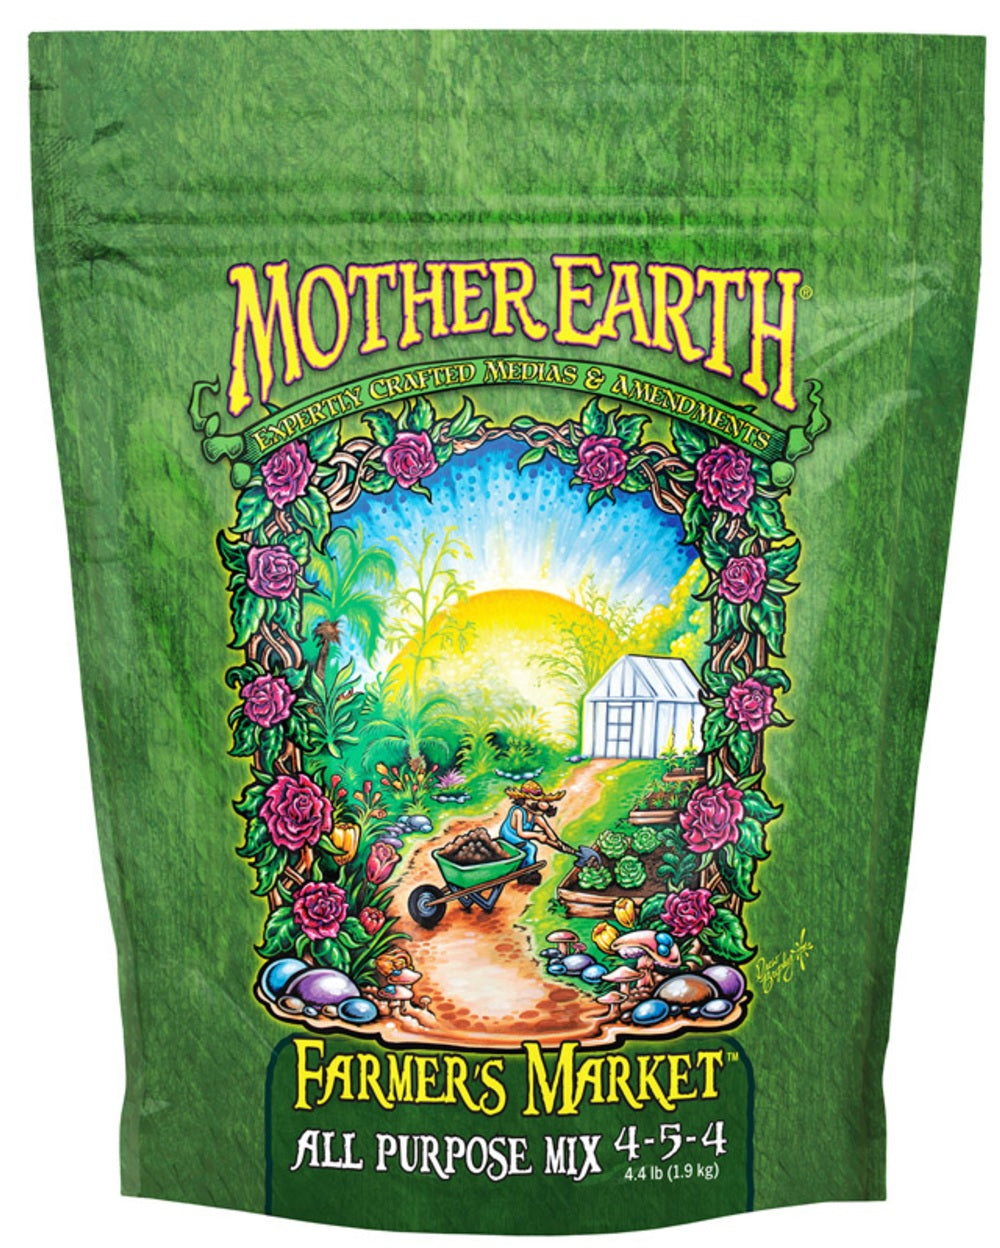 Mother Earth HGC733953 Farmer's Market Planting Mix, 4.4 Lbs